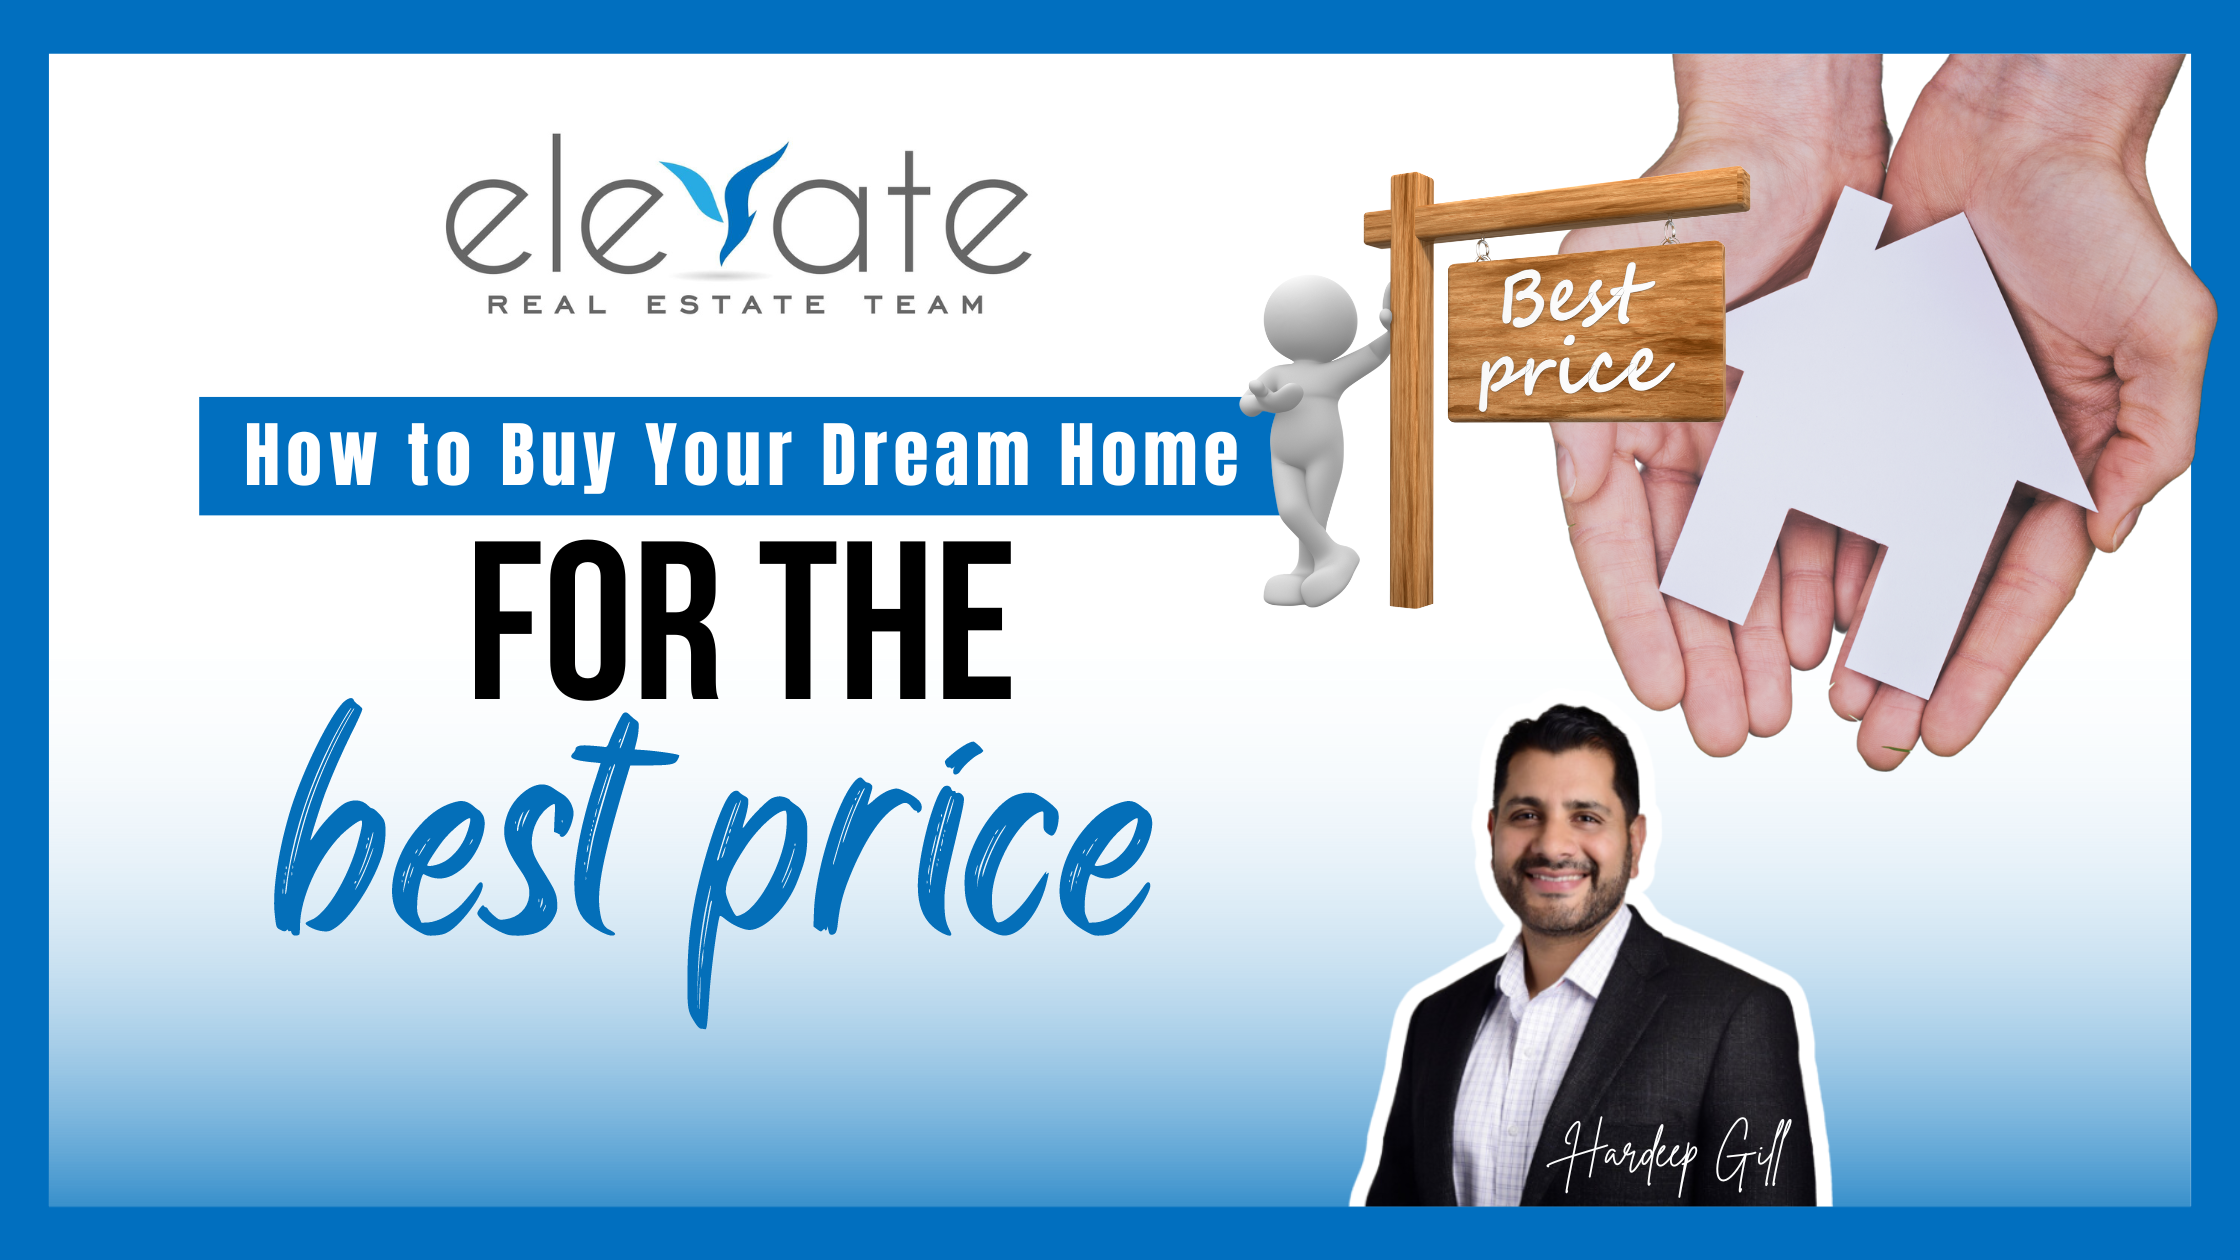 How to Buy Your Dream Home for the BEST PRICE